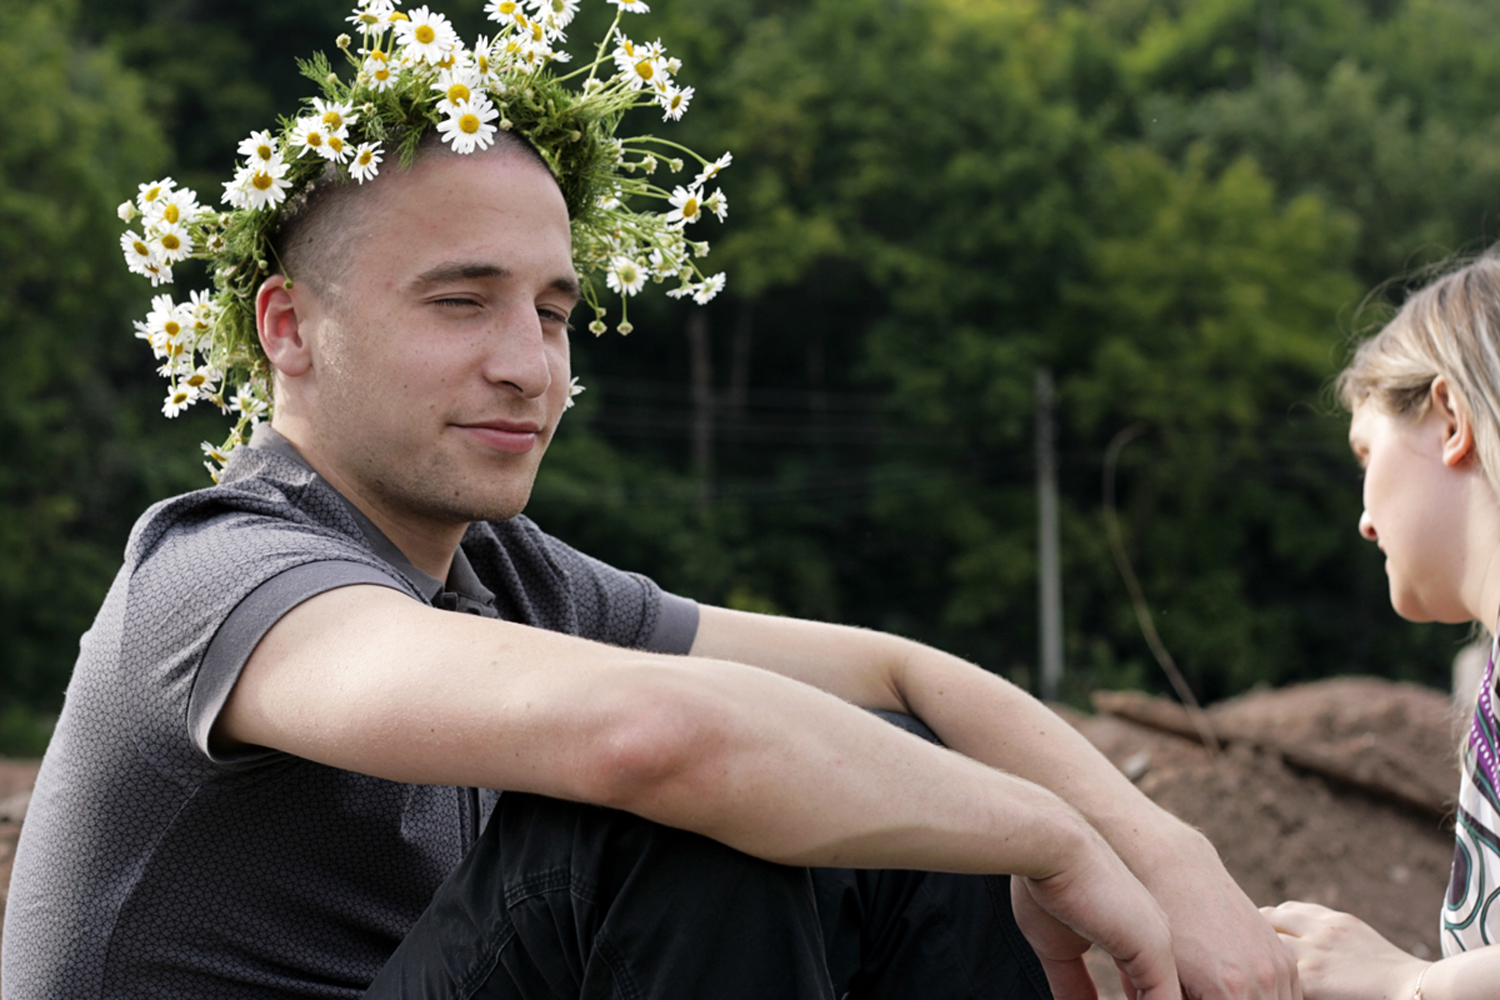 Man with flower crown photo